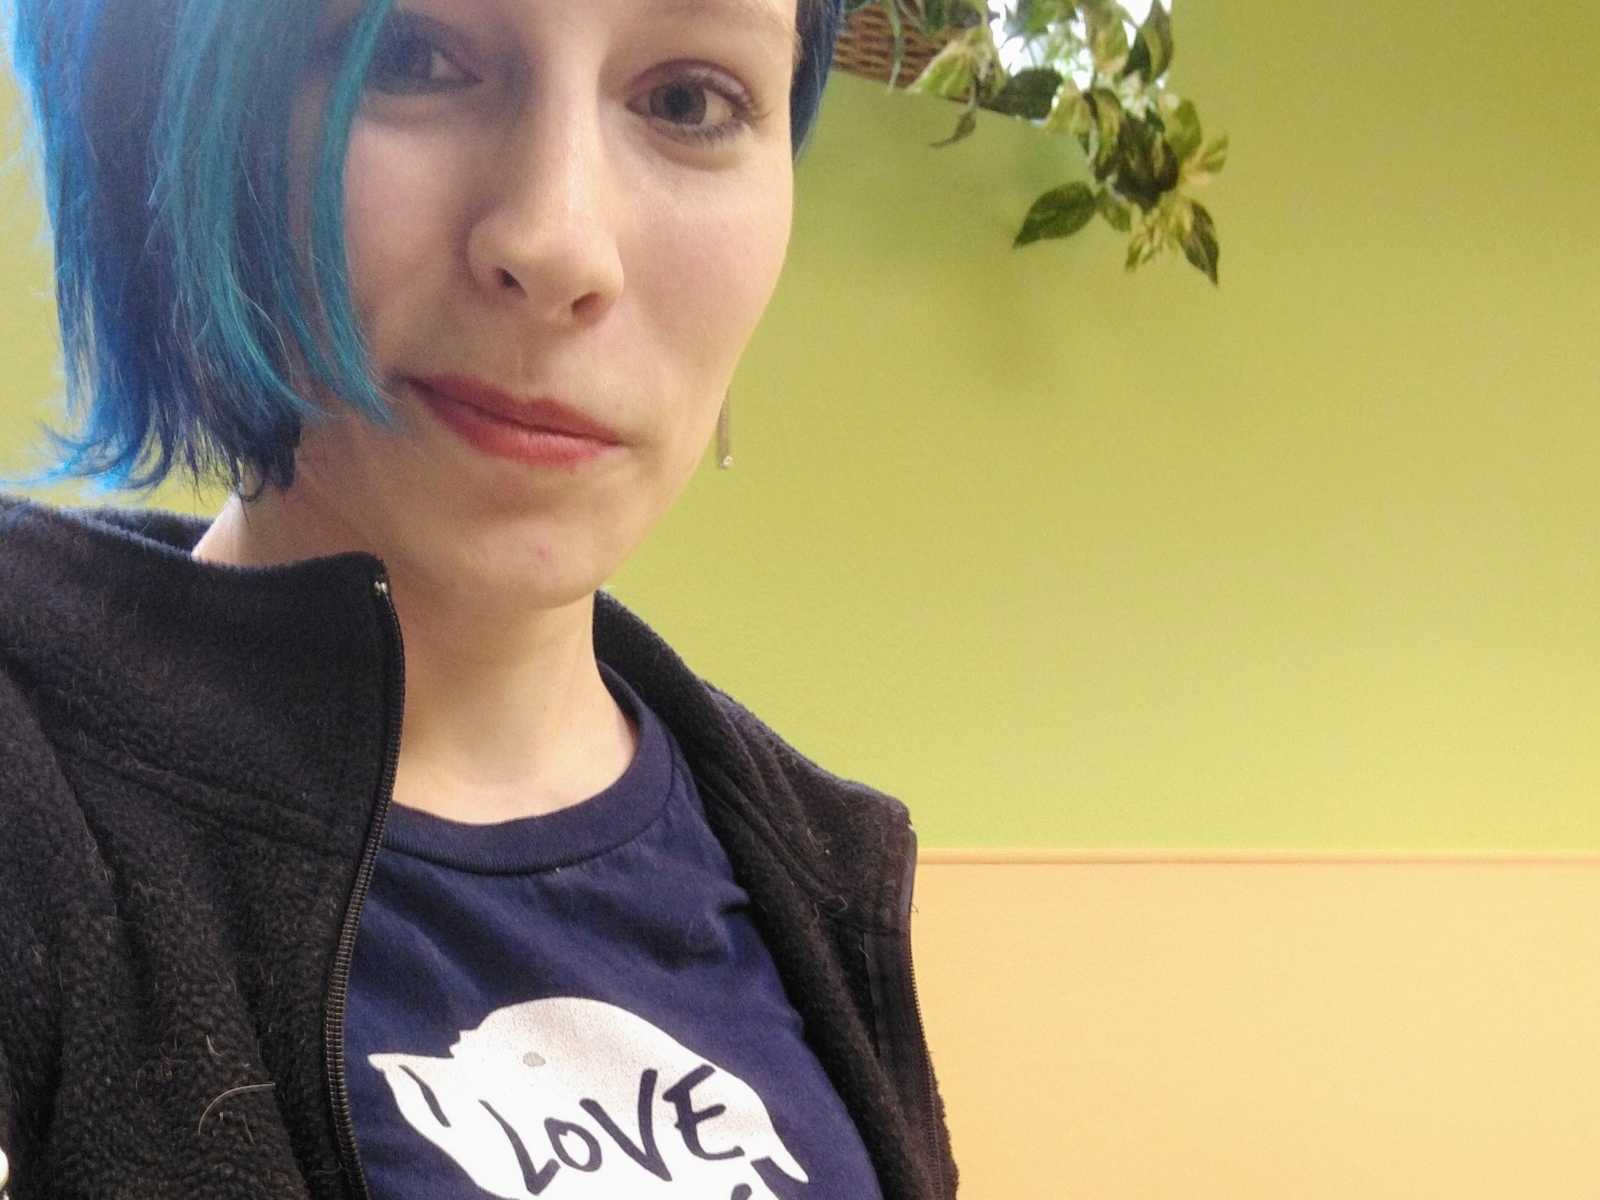 Doggy daycare worker with short blue hair smirks in her selfie